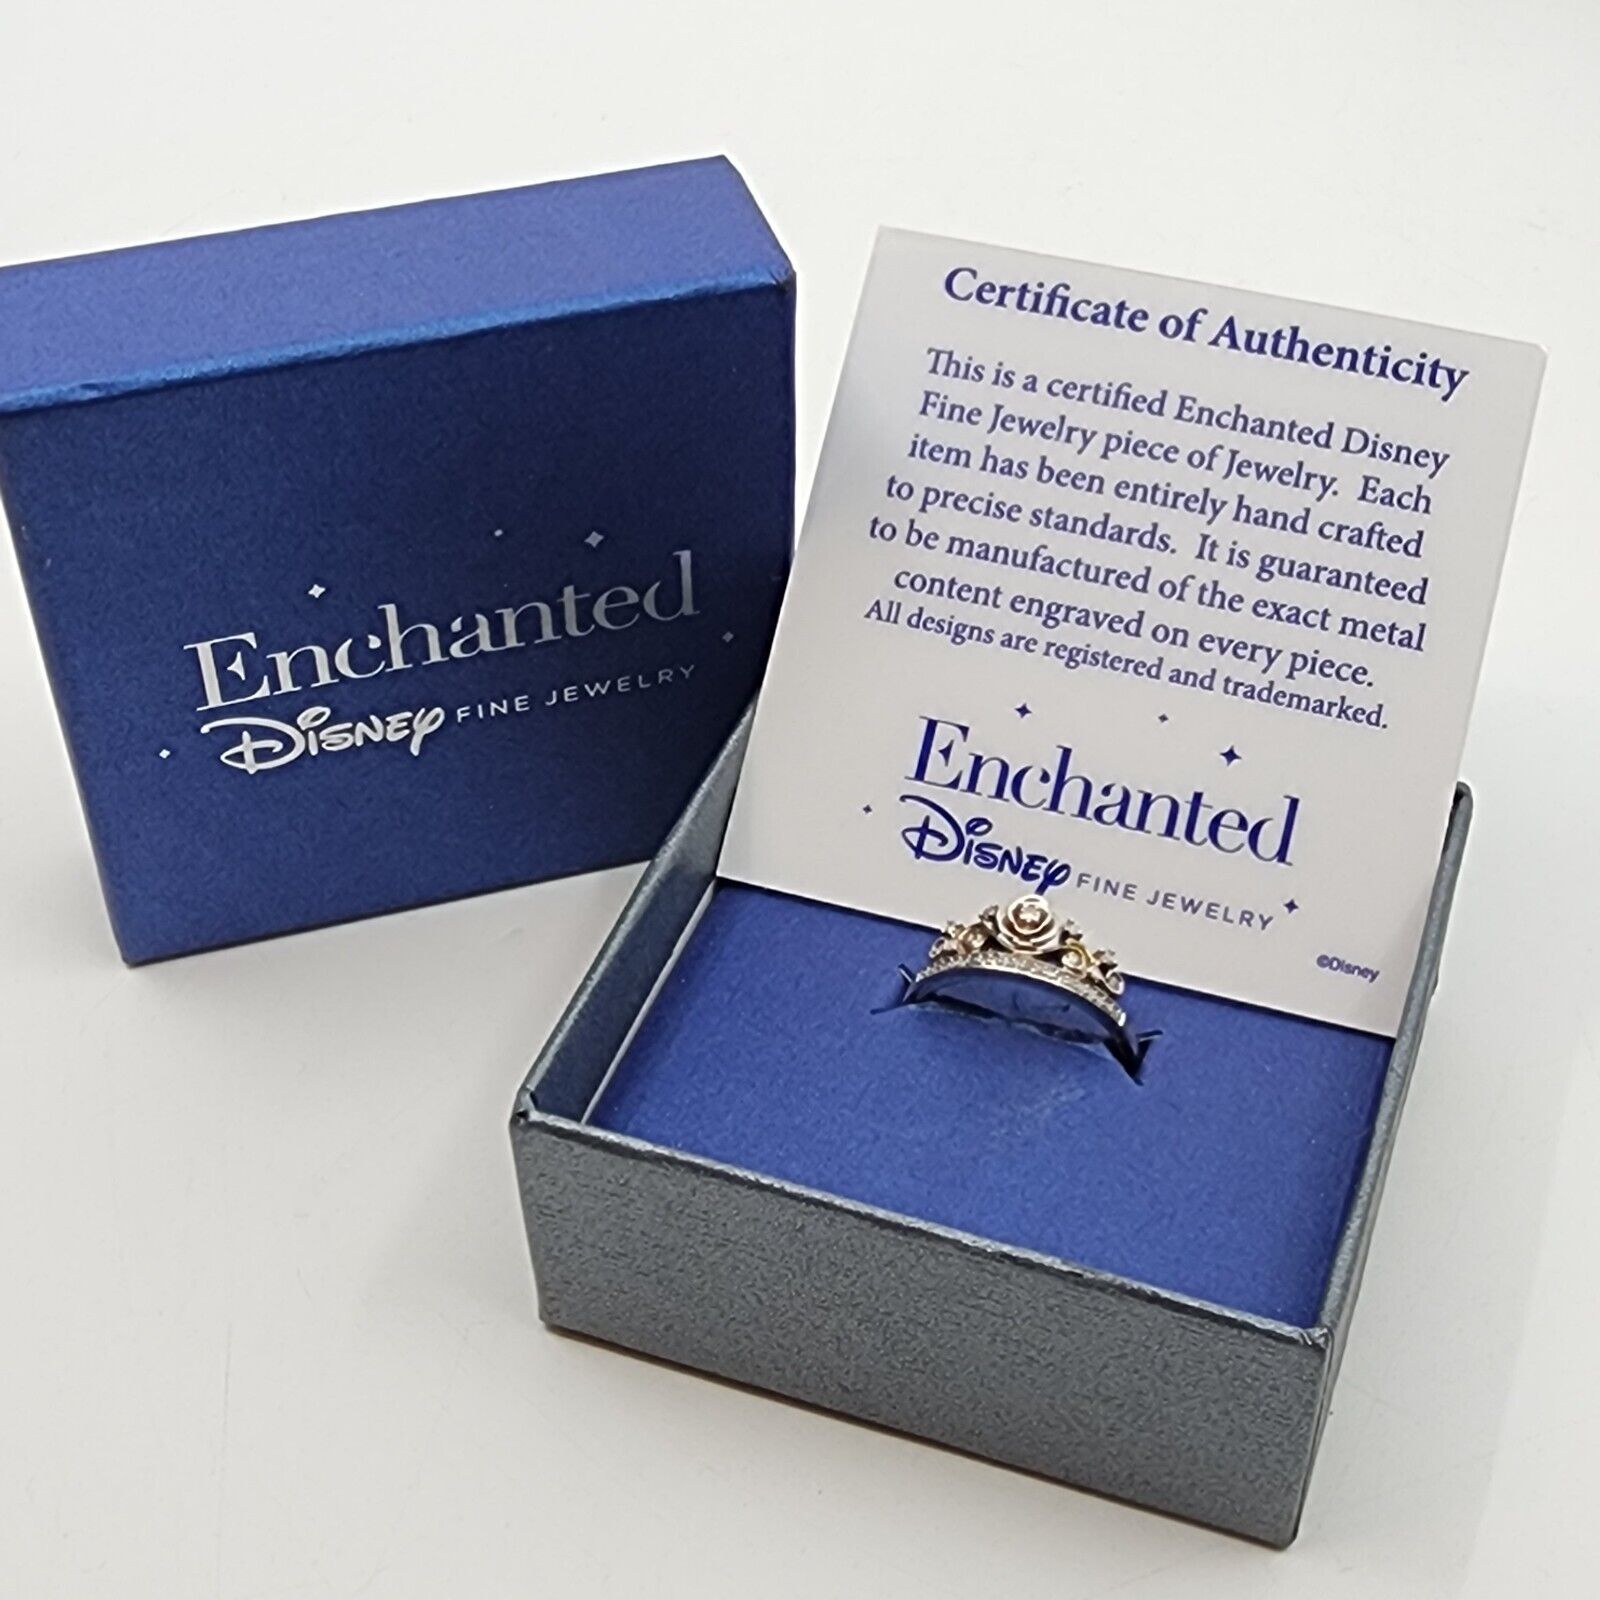 Disney Enchanted Princess Ring Sterling Silver 1/6 TW & 925 CROWN size 8.5